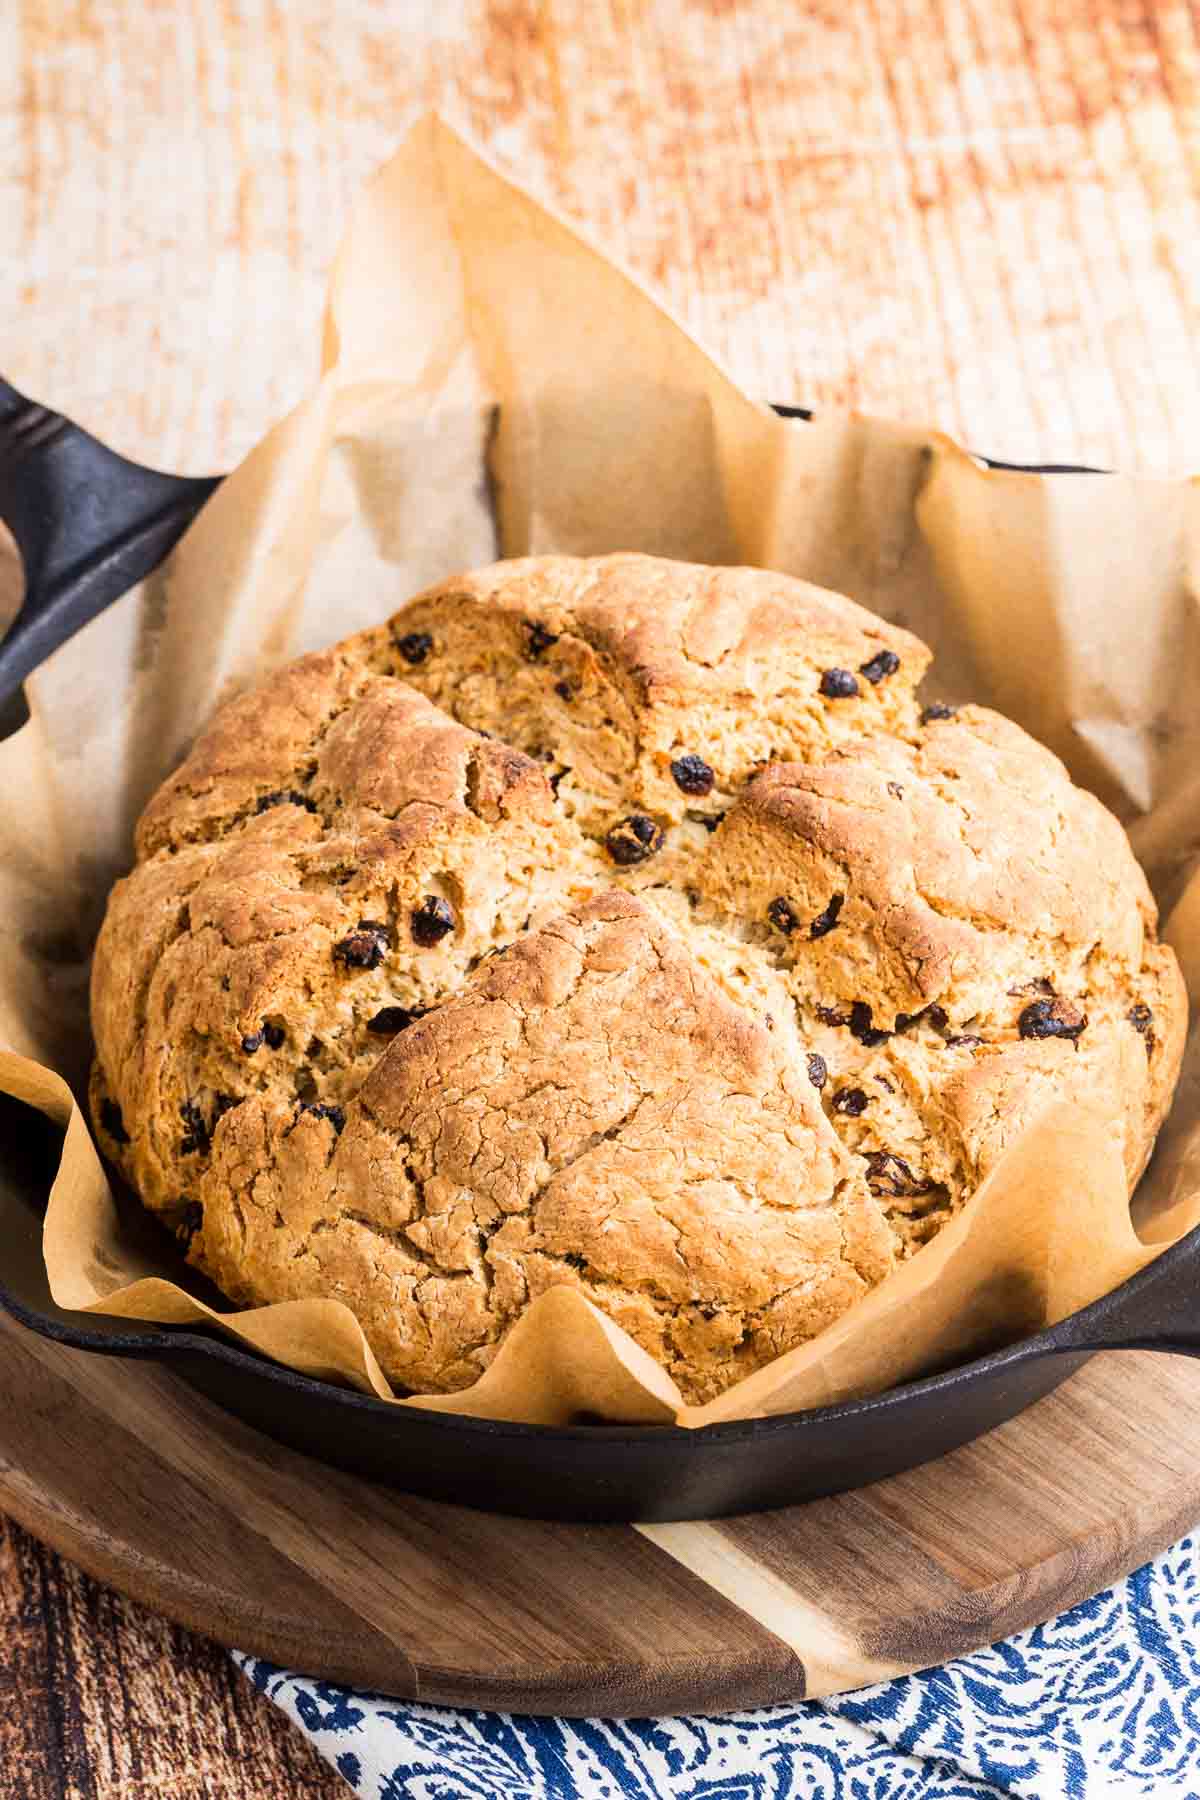 The baked Irish soda bread loaf rests in the pan.